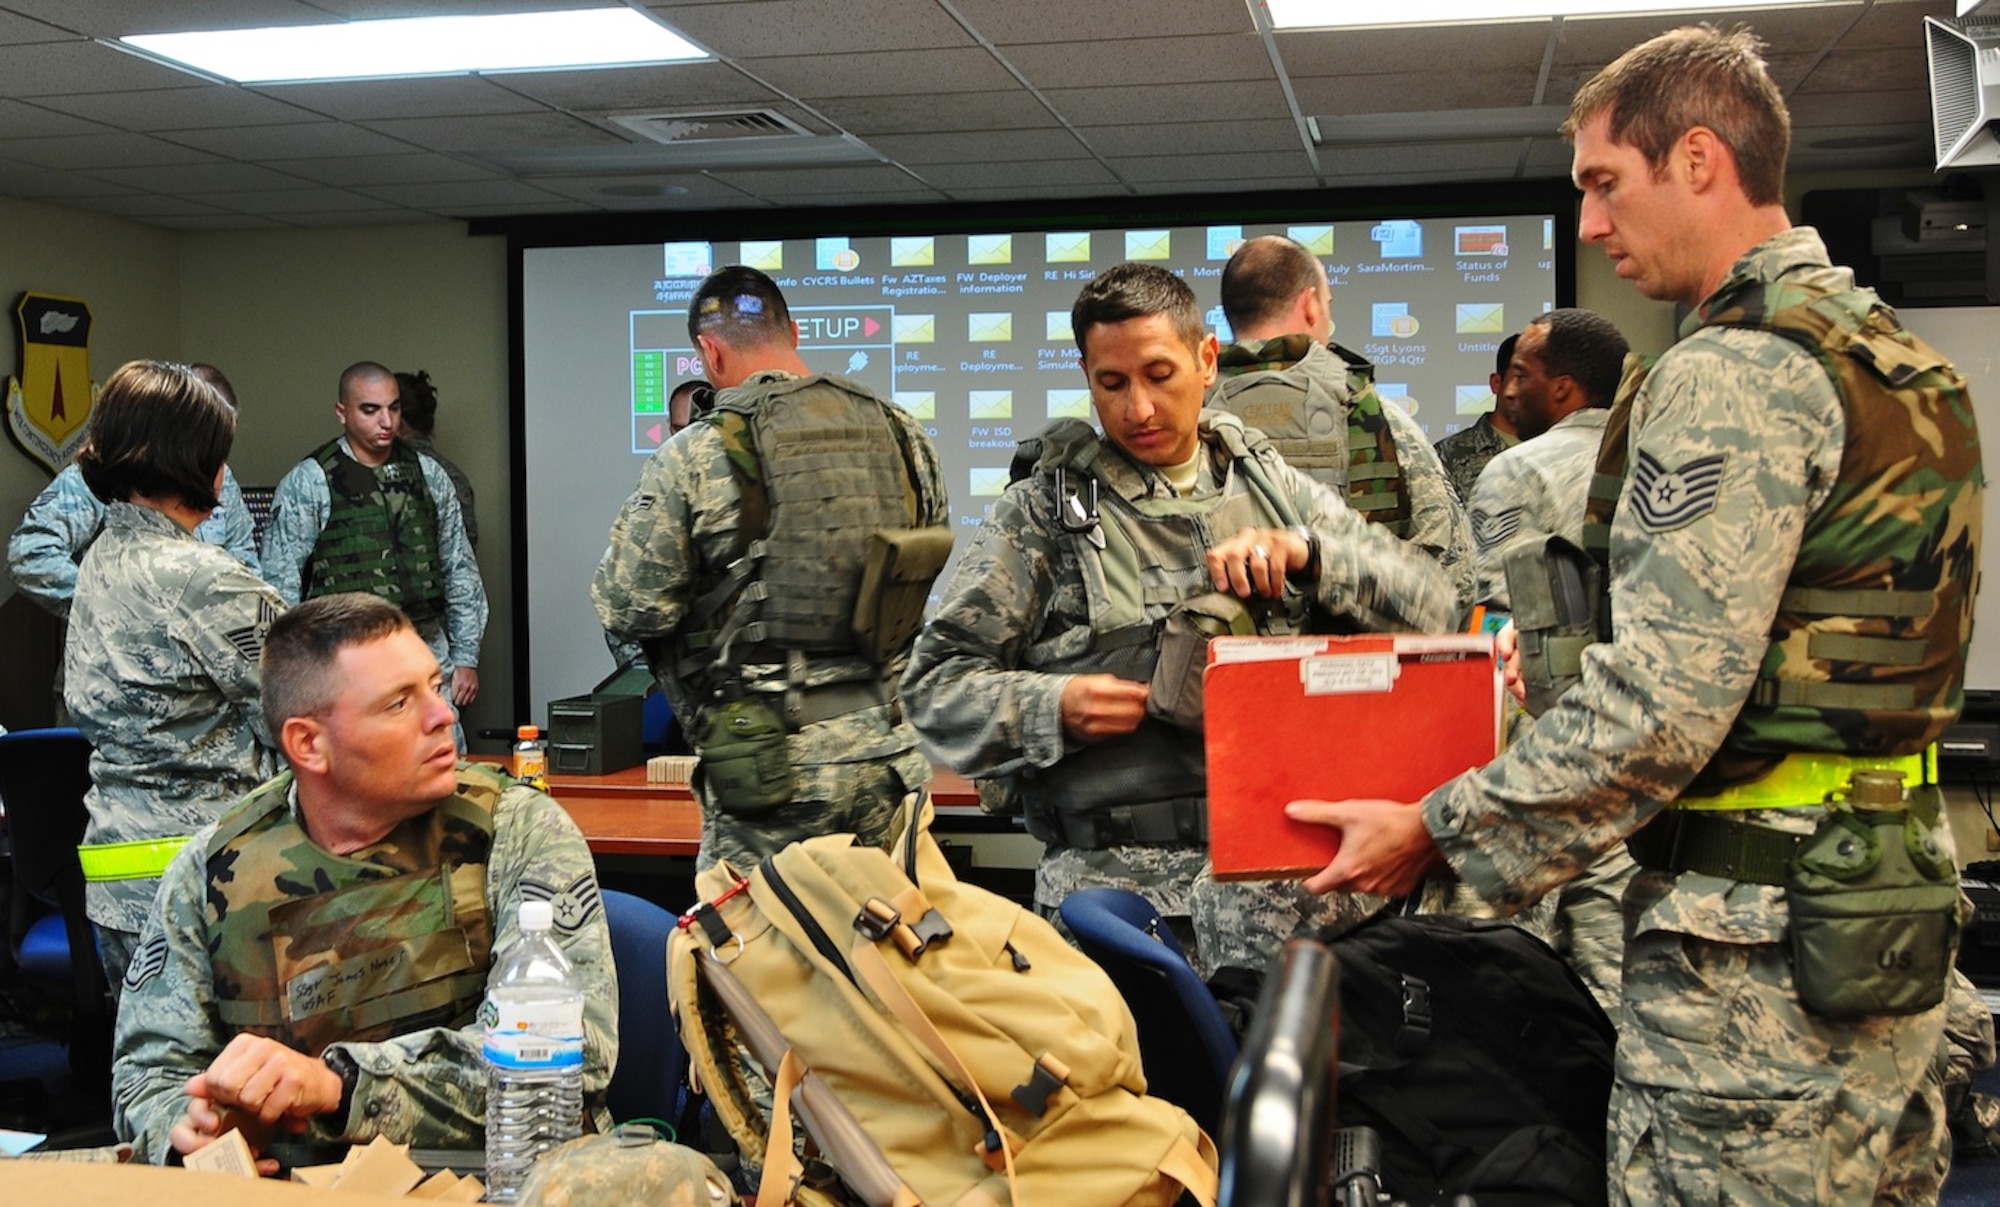 The 644th Combat Communications Squadron members prepare their deployment paper work, their weapons and their gear before heading off to simulated Forward Operating Base Dragon hill April 19. The 644 CBCS is conducting a deployment exercise from April 16 to 27 in order to test their capabilities in a deployed environment and improve their war-fighting capabilities.  (U.S. Air Force photo by Airman 1st Class Marianique Santos)